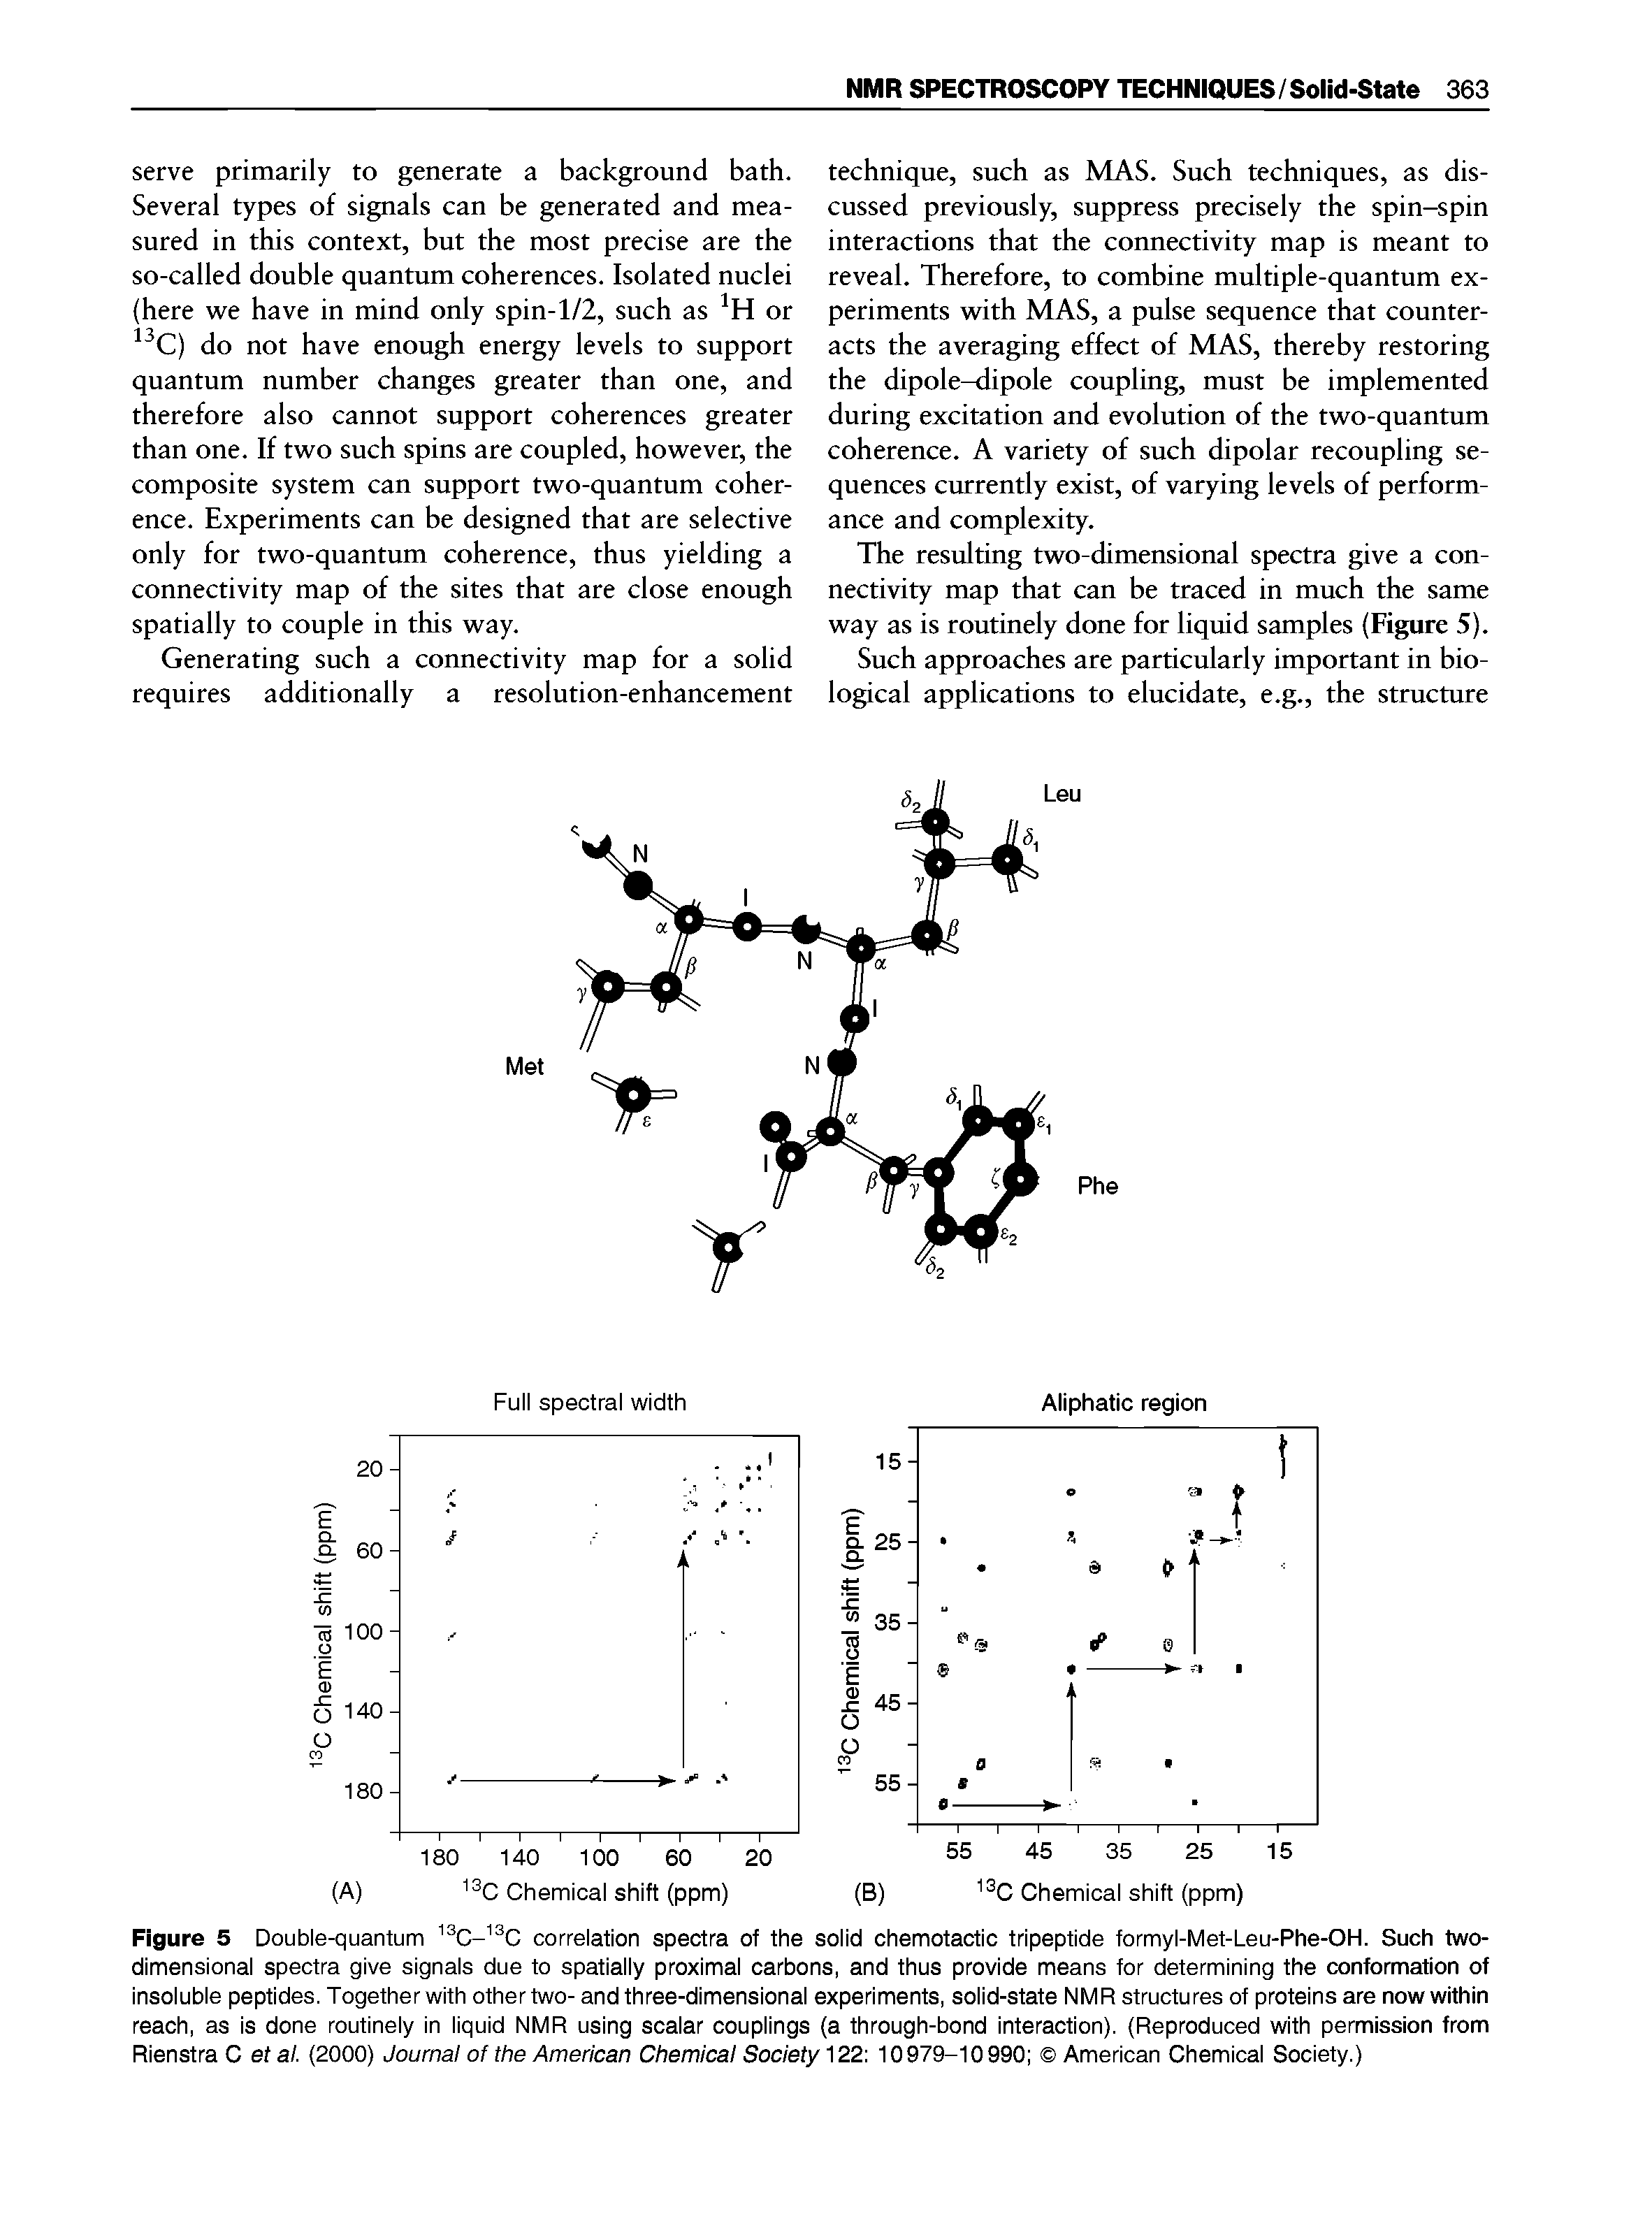 Figure 5 Double-quantum C- C correlation spectra of the solid chemotactic tripeptide formyl-Met-Leu-Phe-OH. Such two-dimensional spectra give signals due to spatially proximal carbons, and thus provide means for determining the conformation of insoluble peptides. Together with other two- and three-dimensional experiments, solid-state NMR structures of proteins are now within reach, as is done routinely in liquid NMR using scalar couplings (a through-bond interaction). (Reproduced with permission from Rienstra C etal. (2000) Journal of the American Chemical Society 22 10979-10990 American Chemical Society.)...